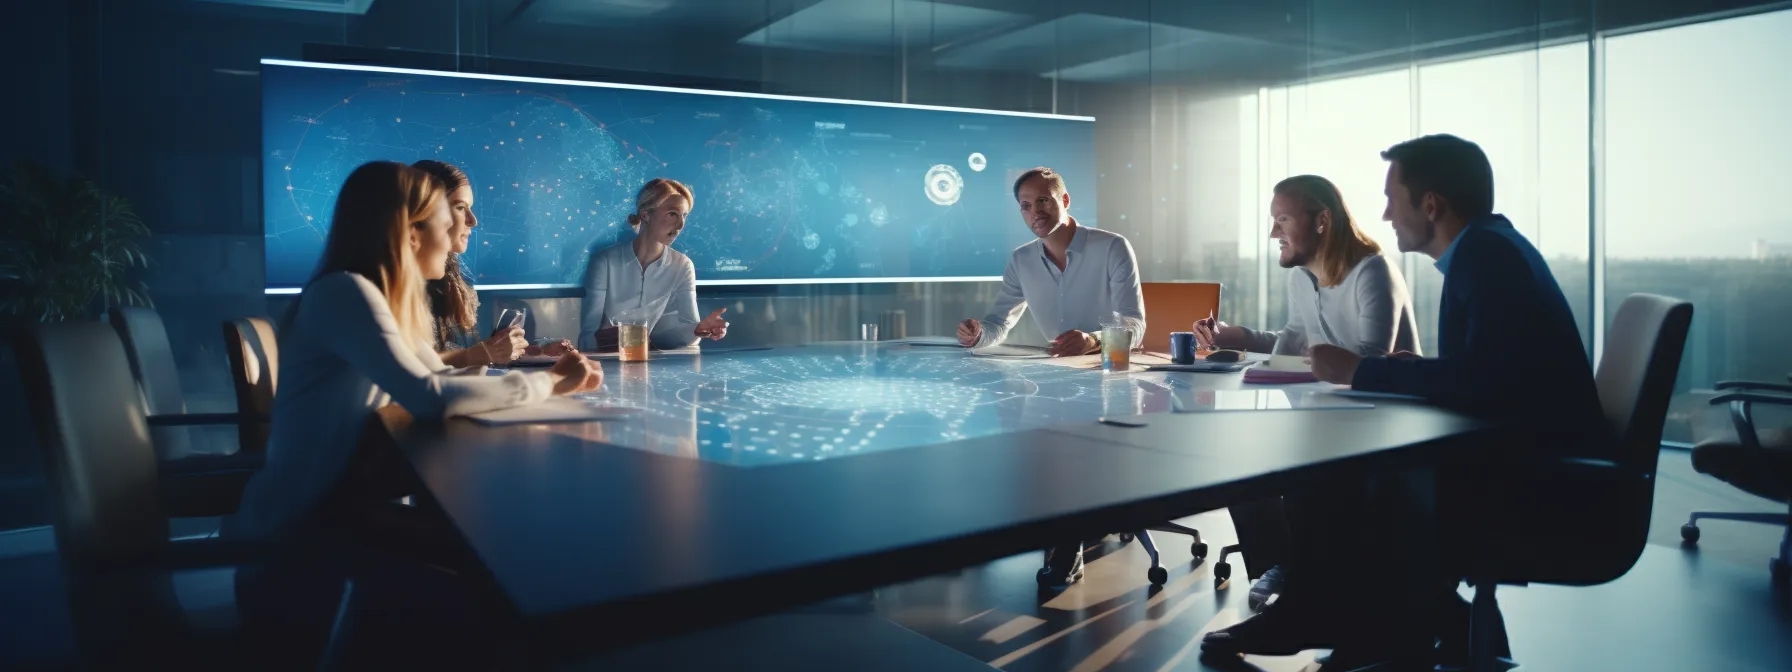 a group of seo professionals discussing strategies and trends in a futuristic, tech-filled conference room.